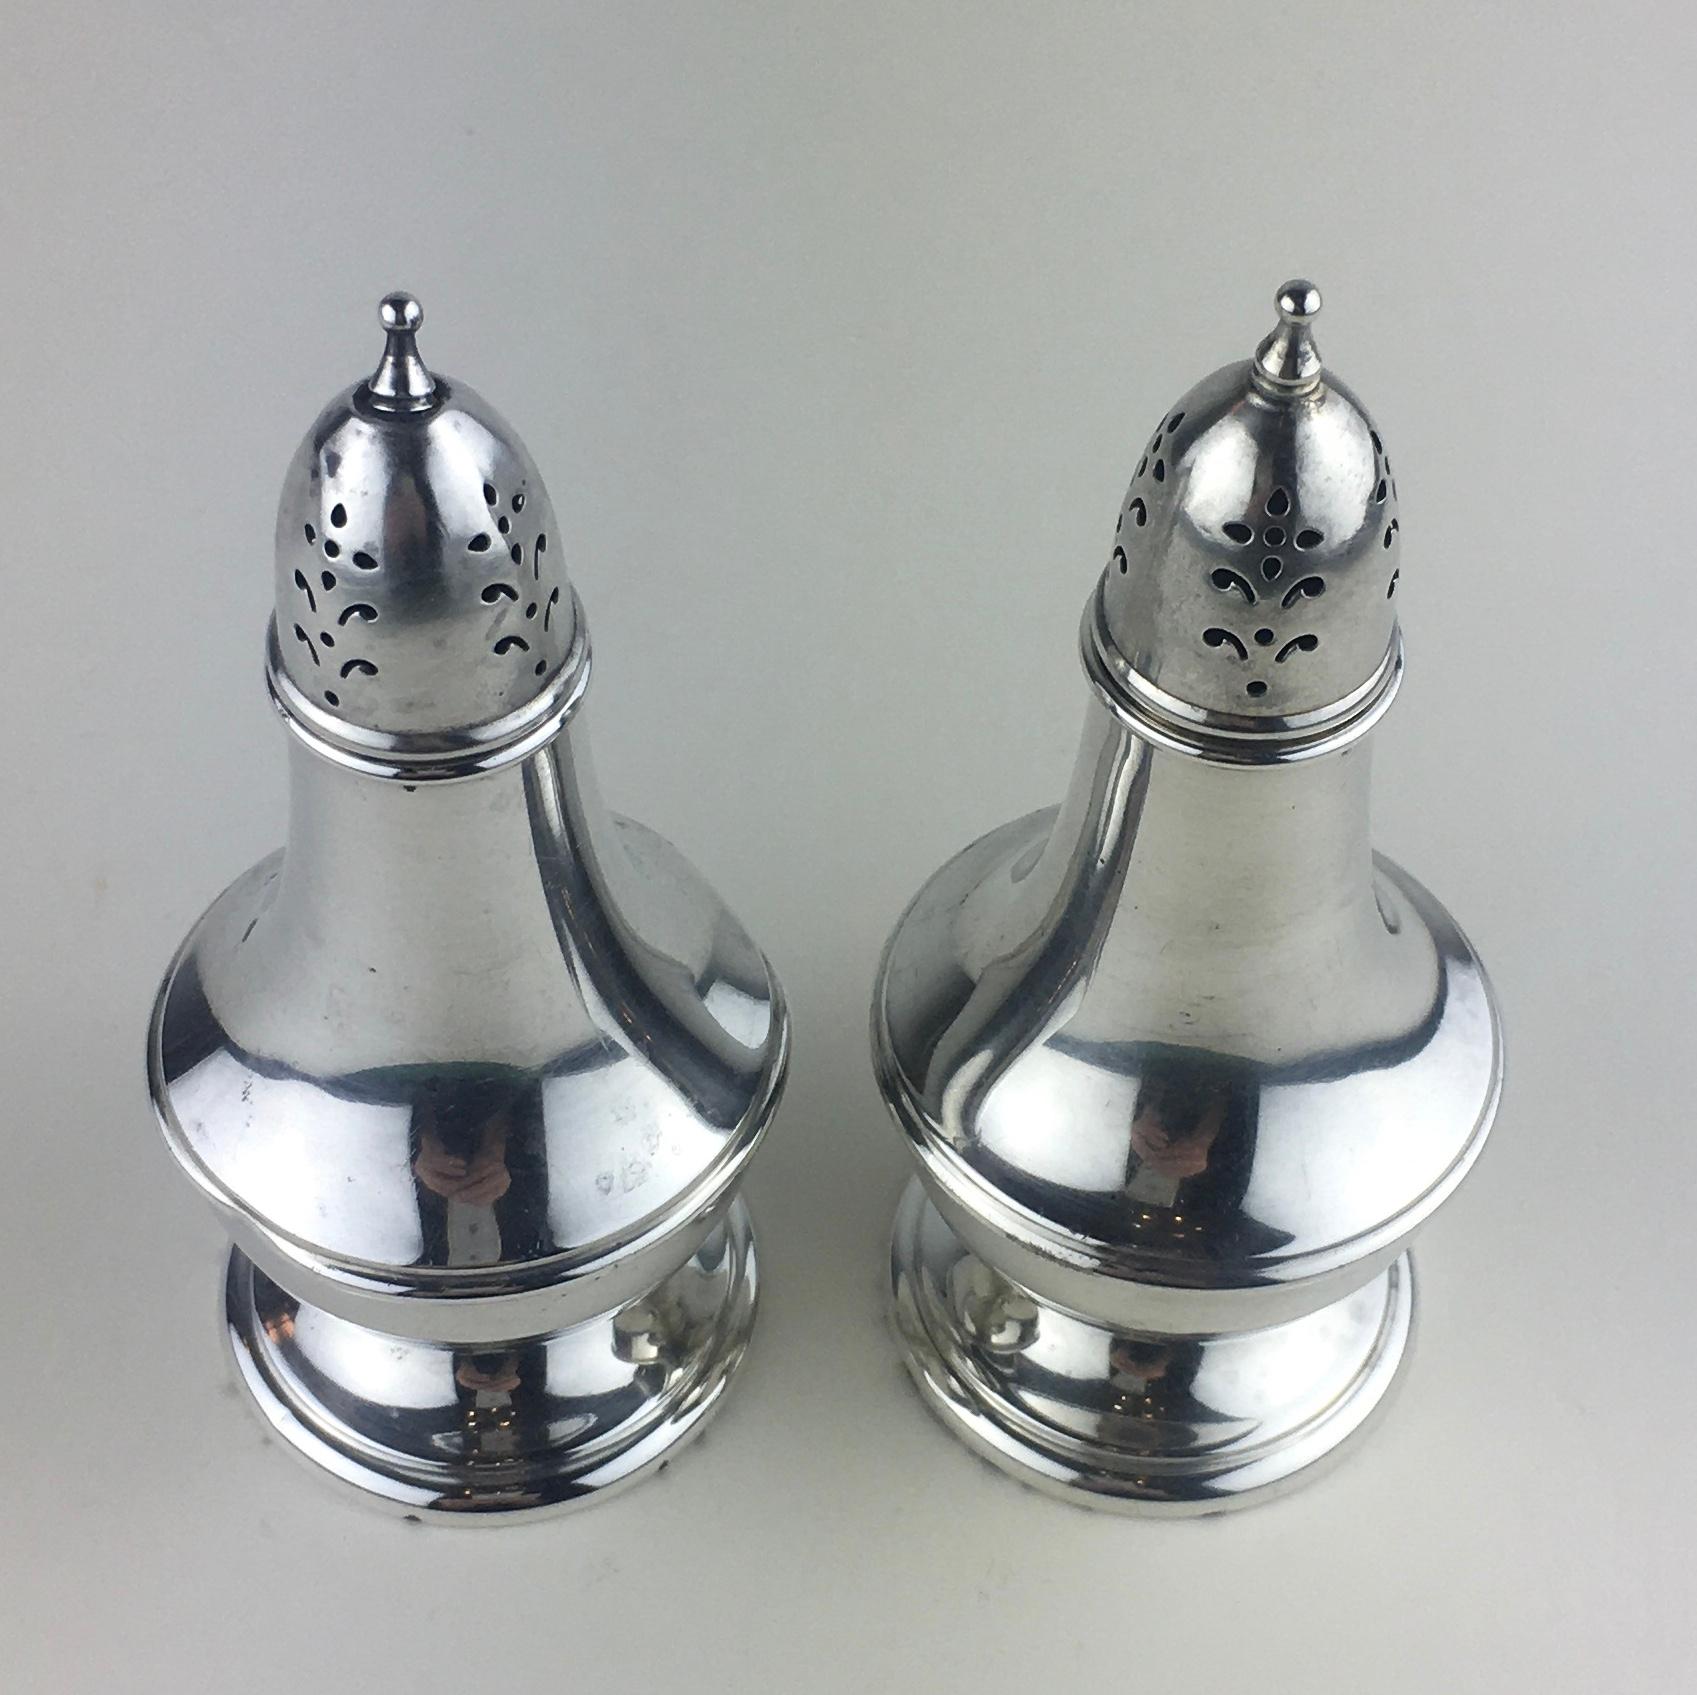 A pair of sterling silver salt and pepper shakers. They are marked “Wallace Sterling 243” to the underside.